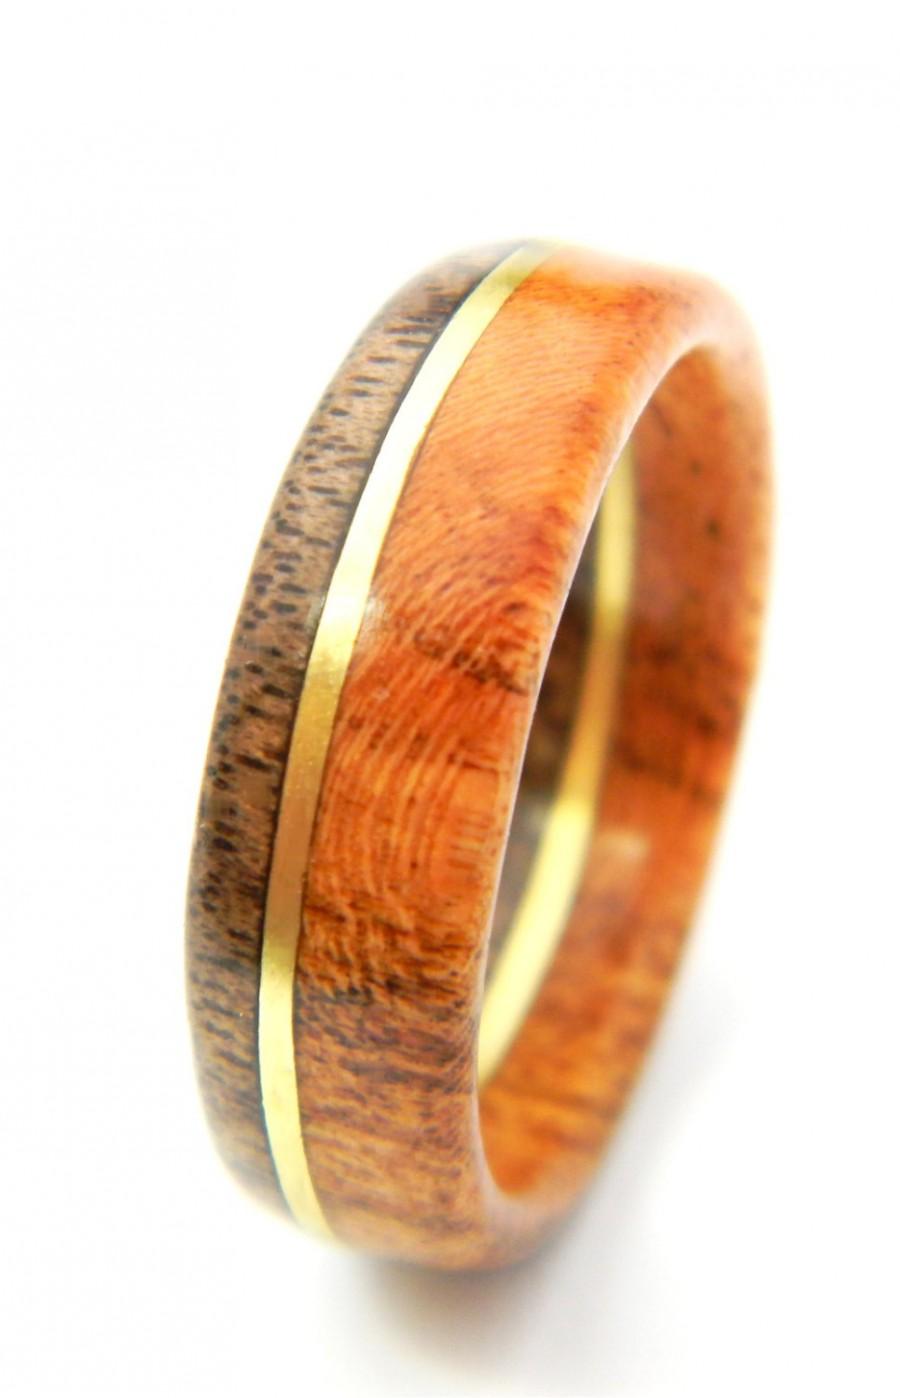 Hochzeit - Unique Walnut and Cherry Wood Ring, Jewelry, Ring, Wood Jewelry, Weddings, Wedding Band, Engagement Ring, Spring, Him, Men, Gift, Mens Gift